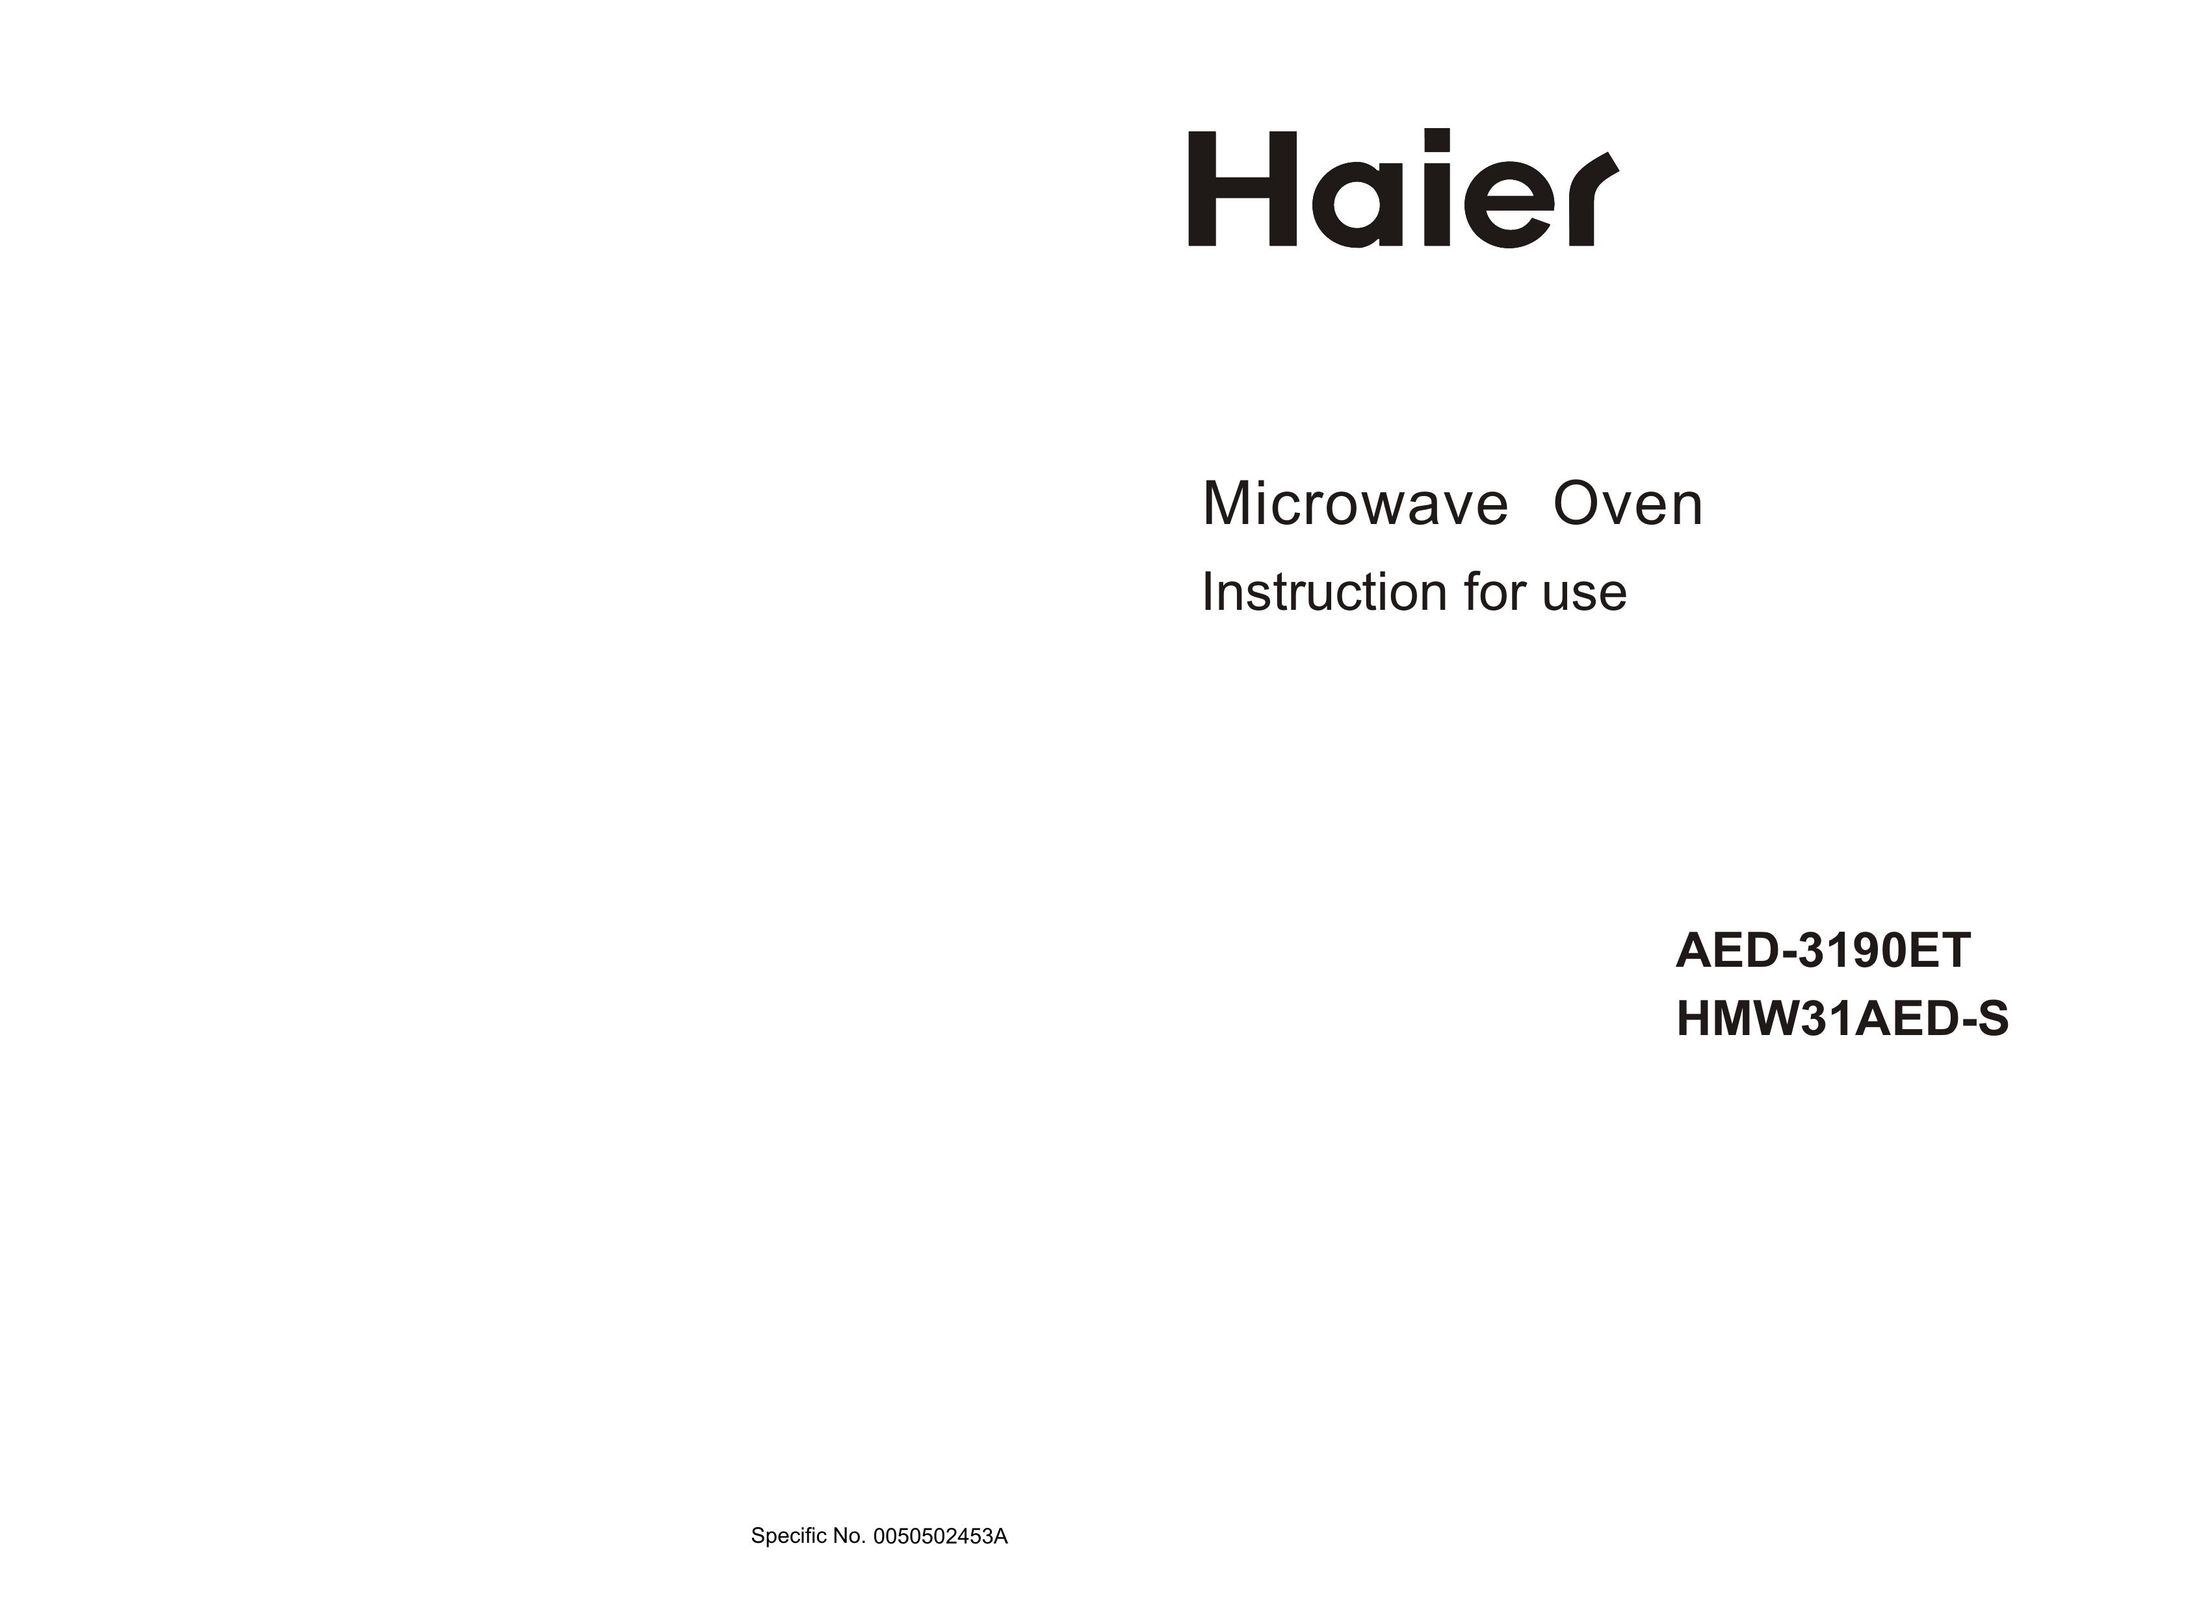 Haier AED-3190ET Microwave Oven User Manual